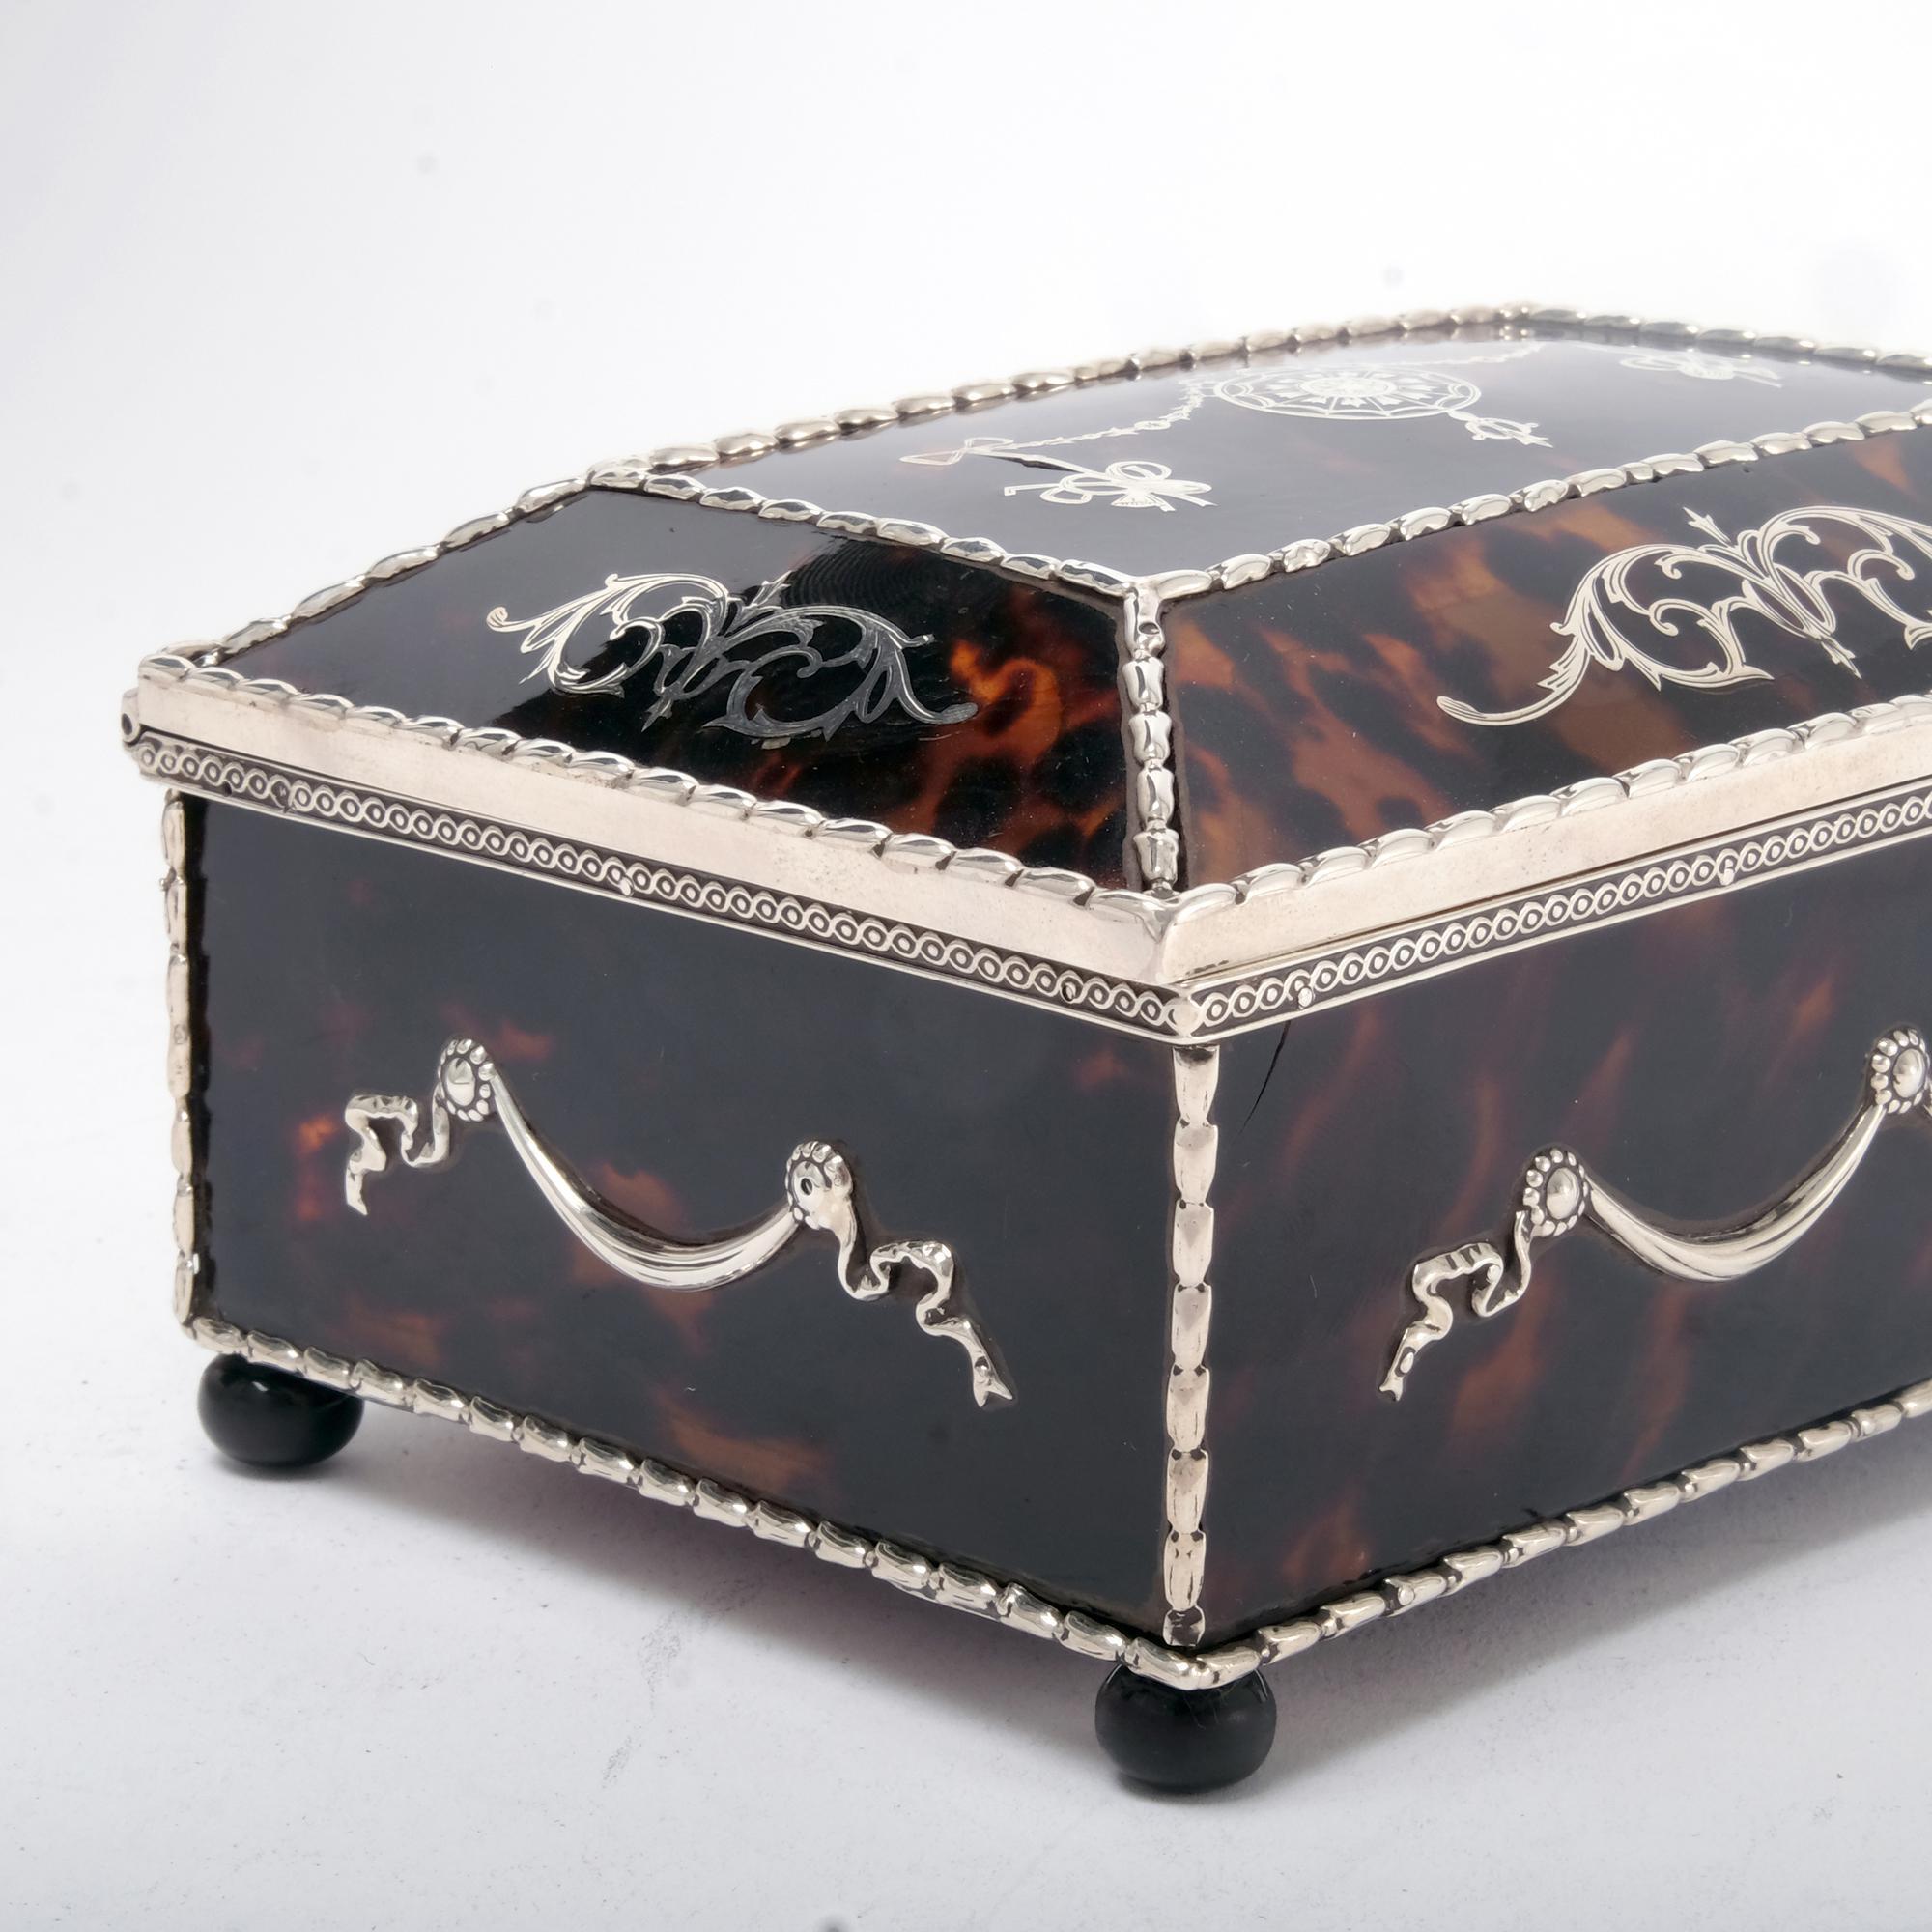 A fine Edwardian handmade jewel box with tortoiseshell panels held in place with a silver frame and decorated both with applied silver mounts in high relief plus silver inlay that has been hand engraved. The box rests on four ebonised wood bun